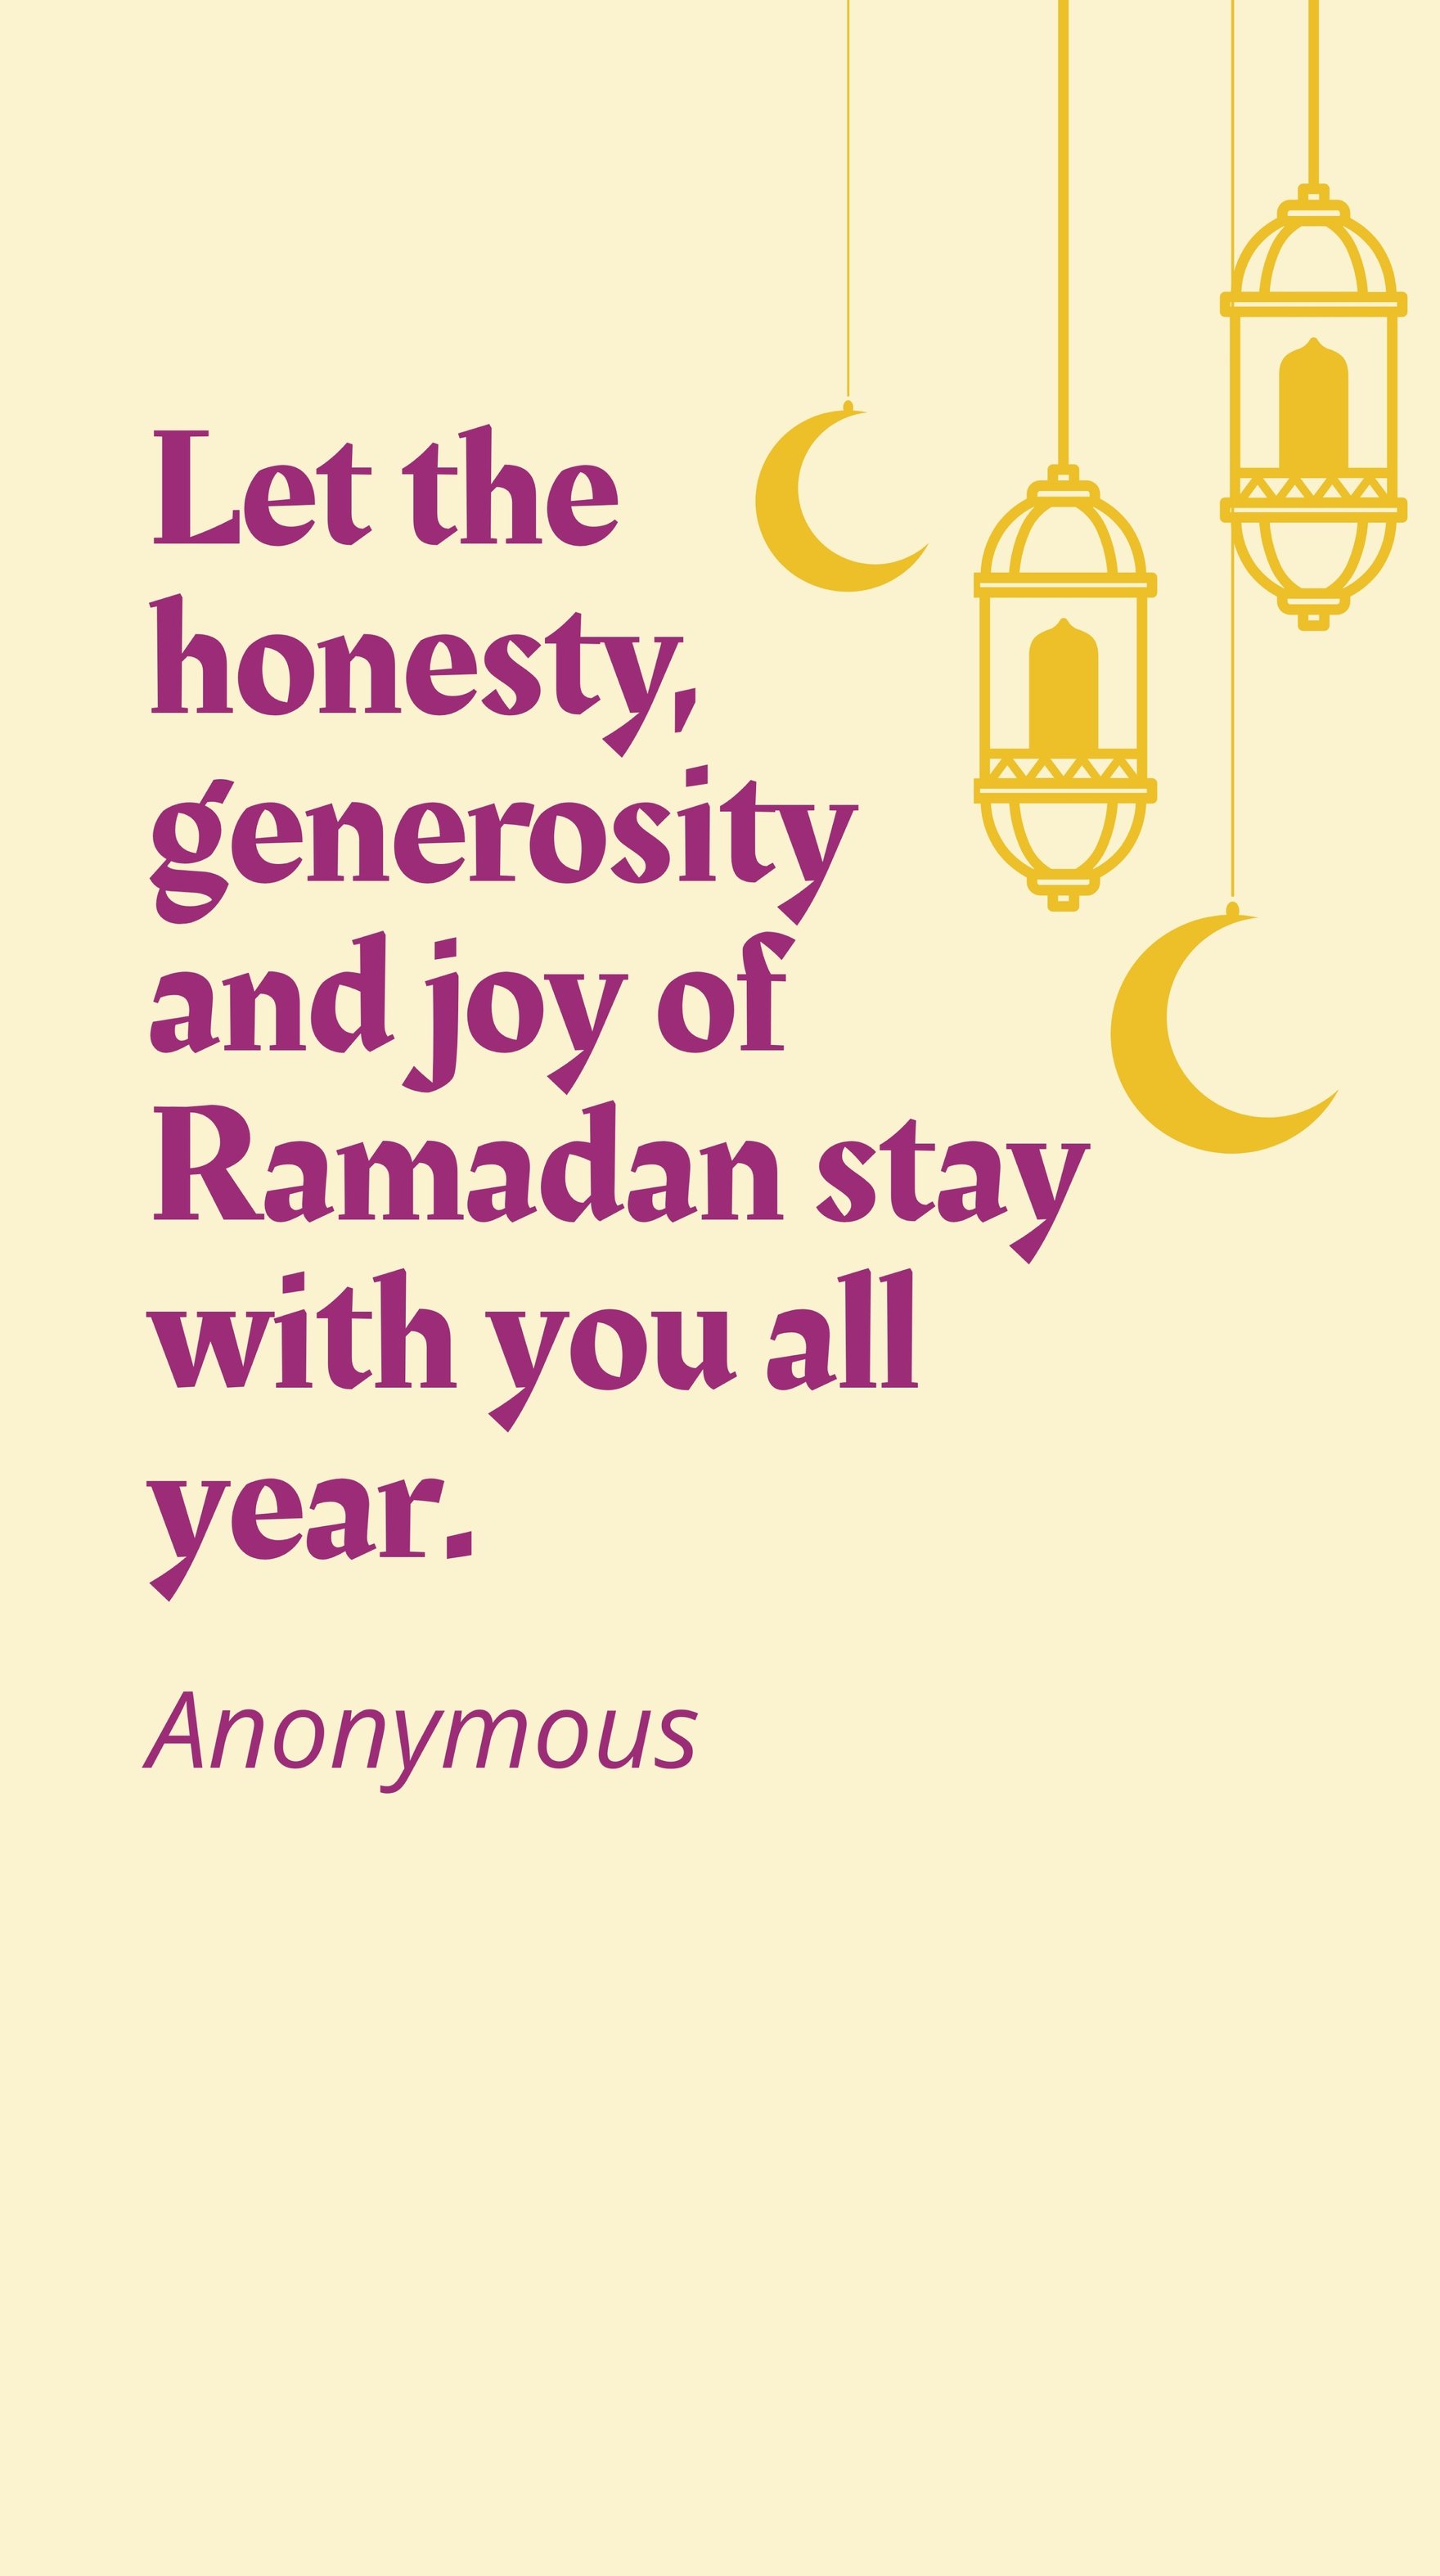 Anonymous - Let the honesty, generosity and joy of Ramadan stay with you all year. in JPG